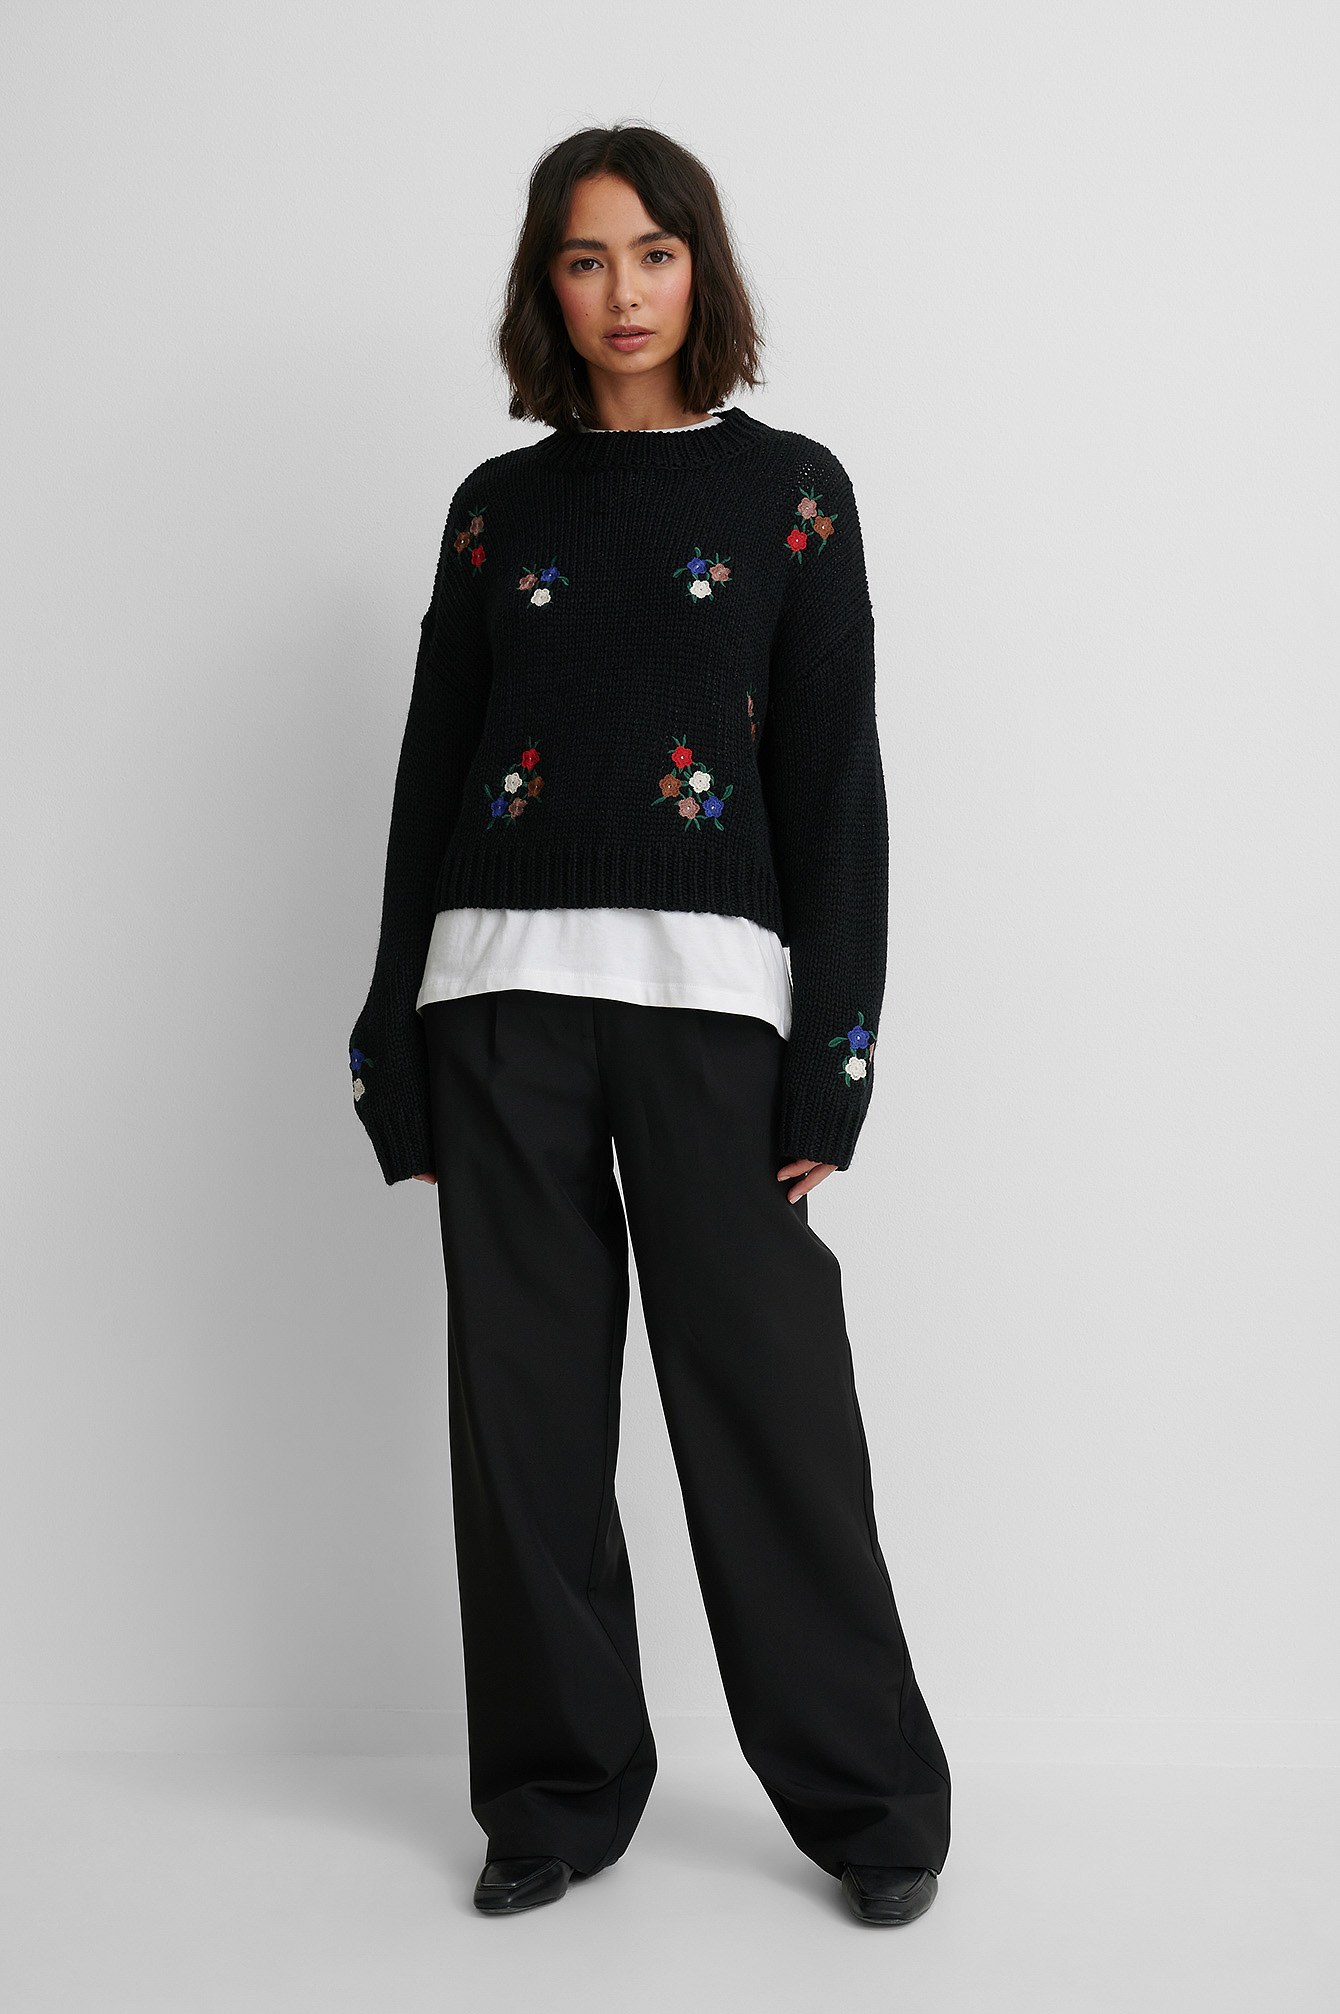 Flower Embroidery Round Neck Knitted Sweater.